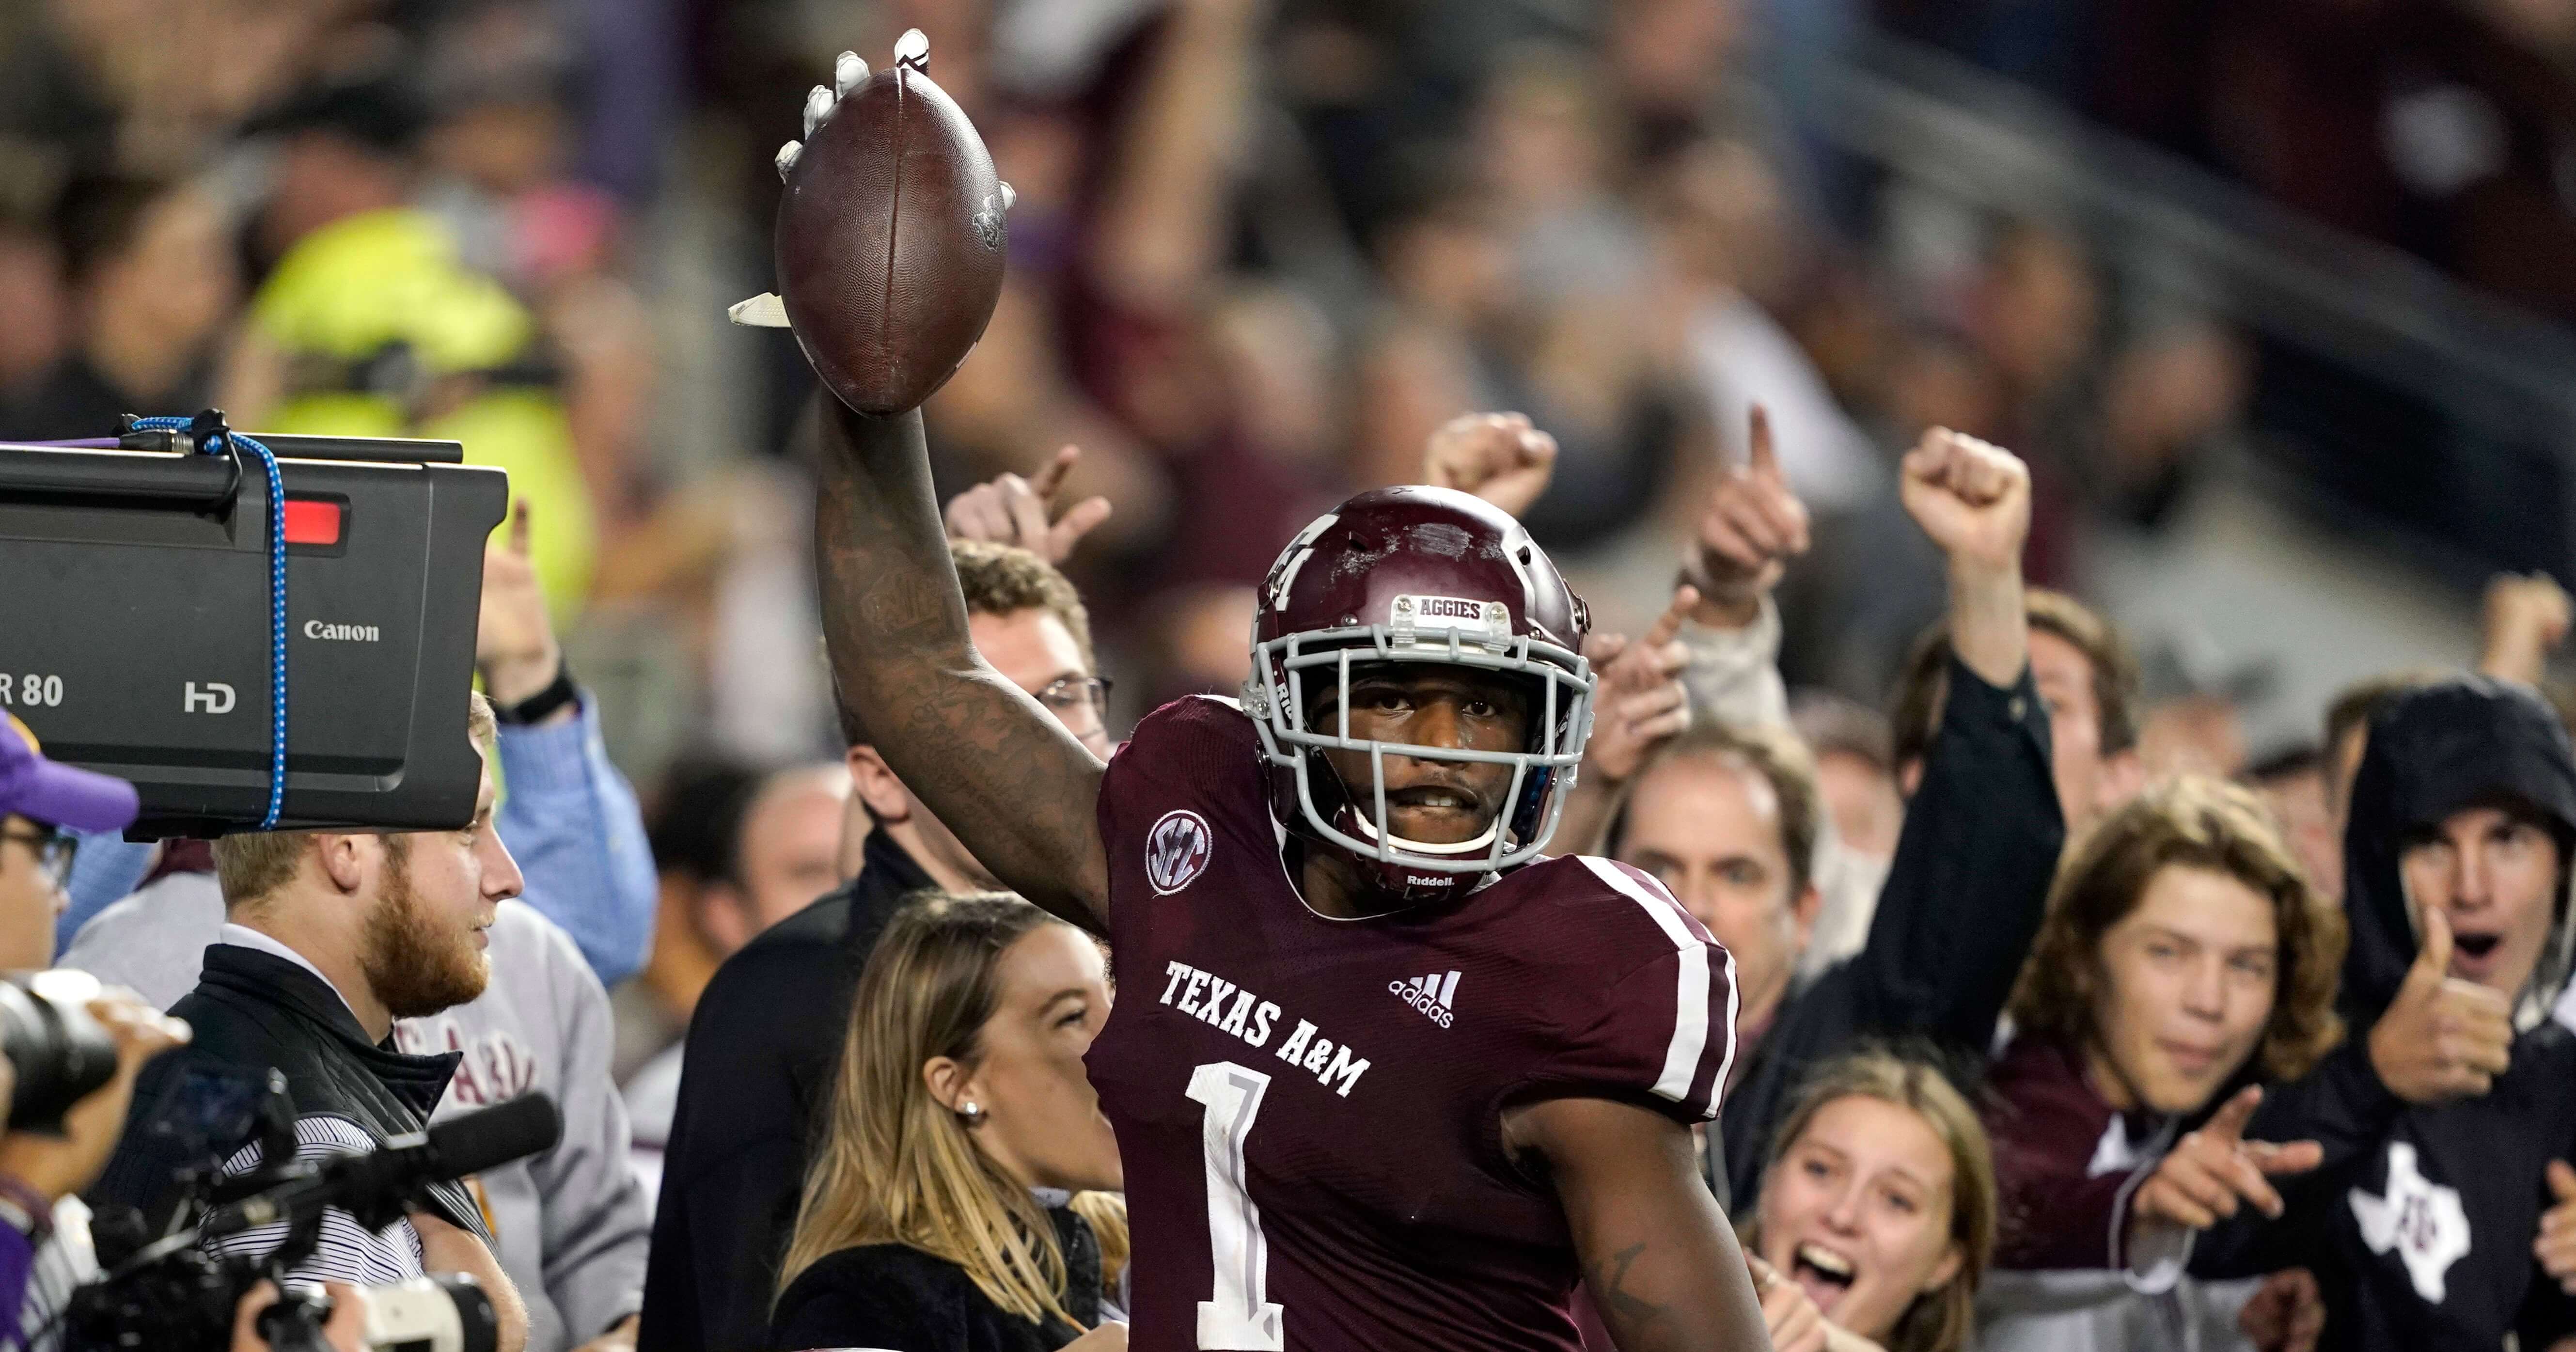 Texas A&M wide receiver Quartney Davis celebrates after catching a touchdown pass during the seventh overtime of Saturday's game against LSU in College Station, Texas.